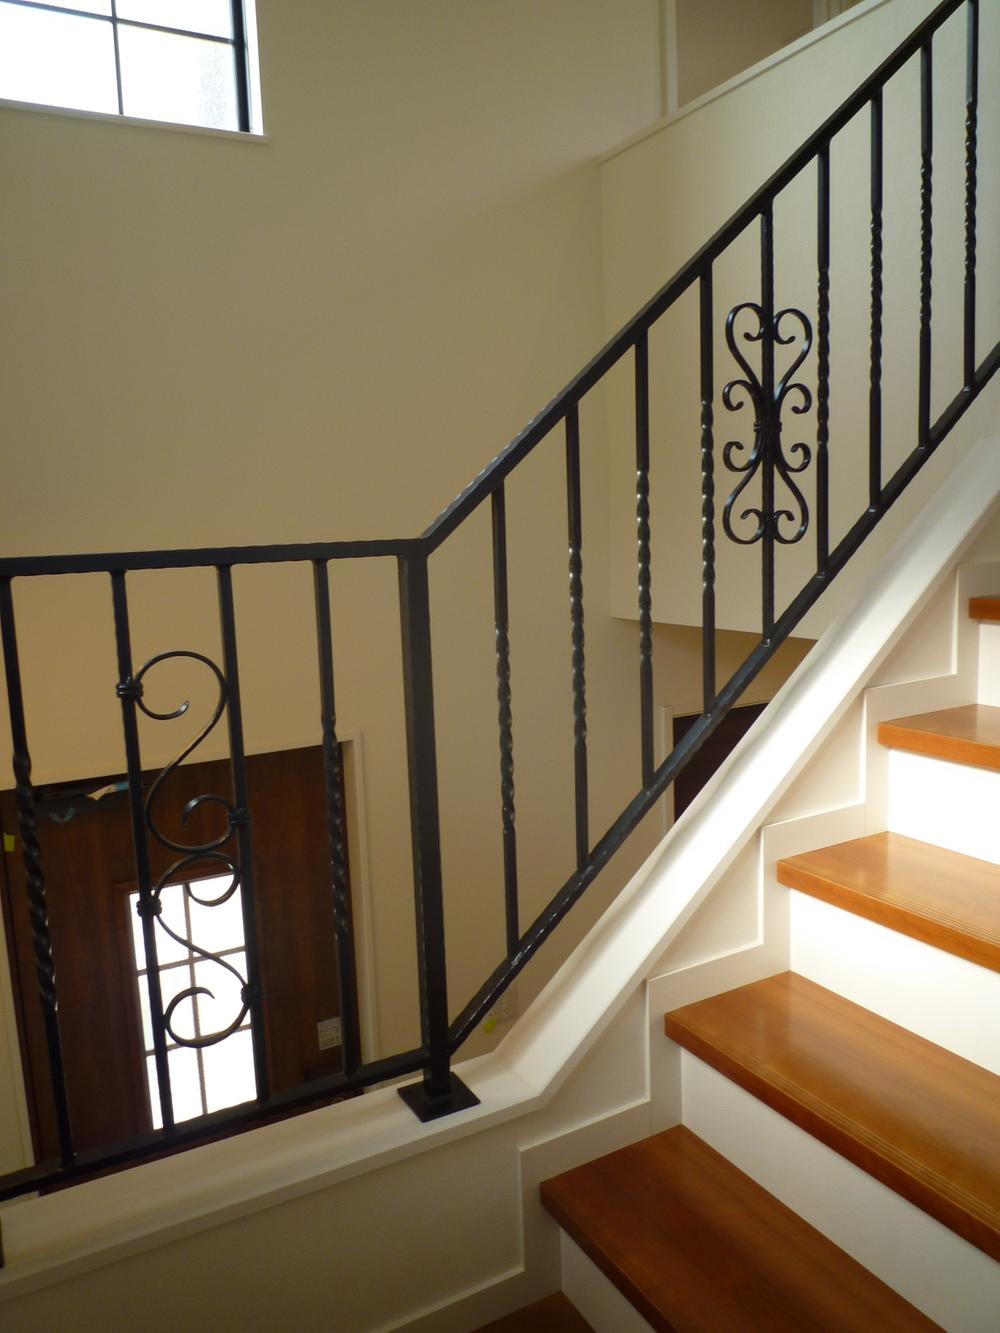 Other. It overlooks the entrance of a large space if you wish from the stairs